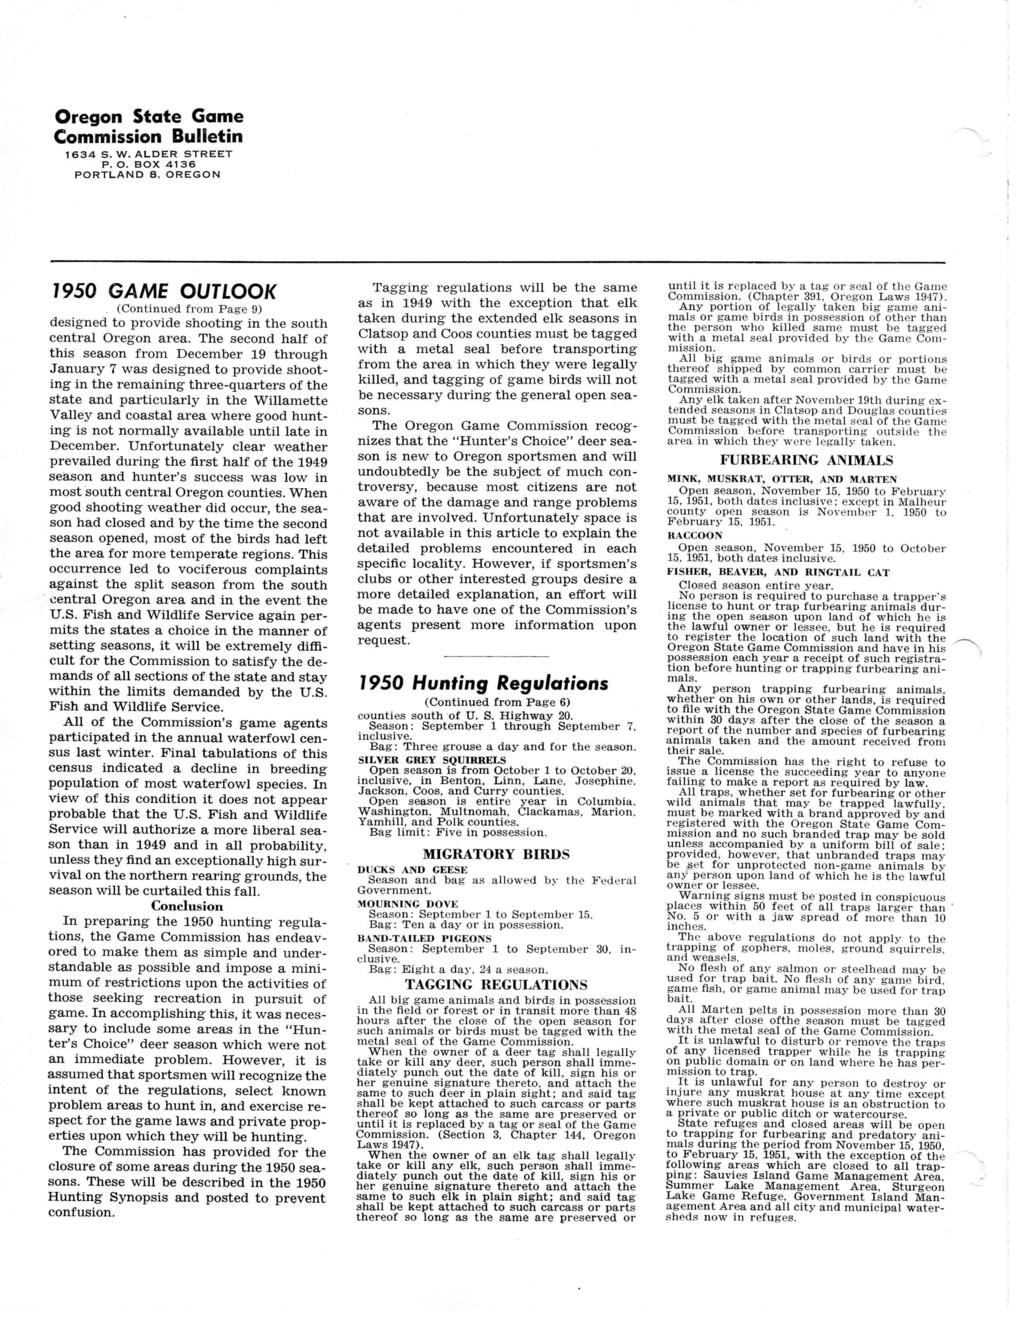 Oregon State Game Commission Bulletin 1634 S. W. ALDER STREET P. O. BOX 4136 PORTLAND 8. OREGON 1950 GAME OUTLOOK (Continued from Page 9) designed to provide shooting in the south central Oregon area.